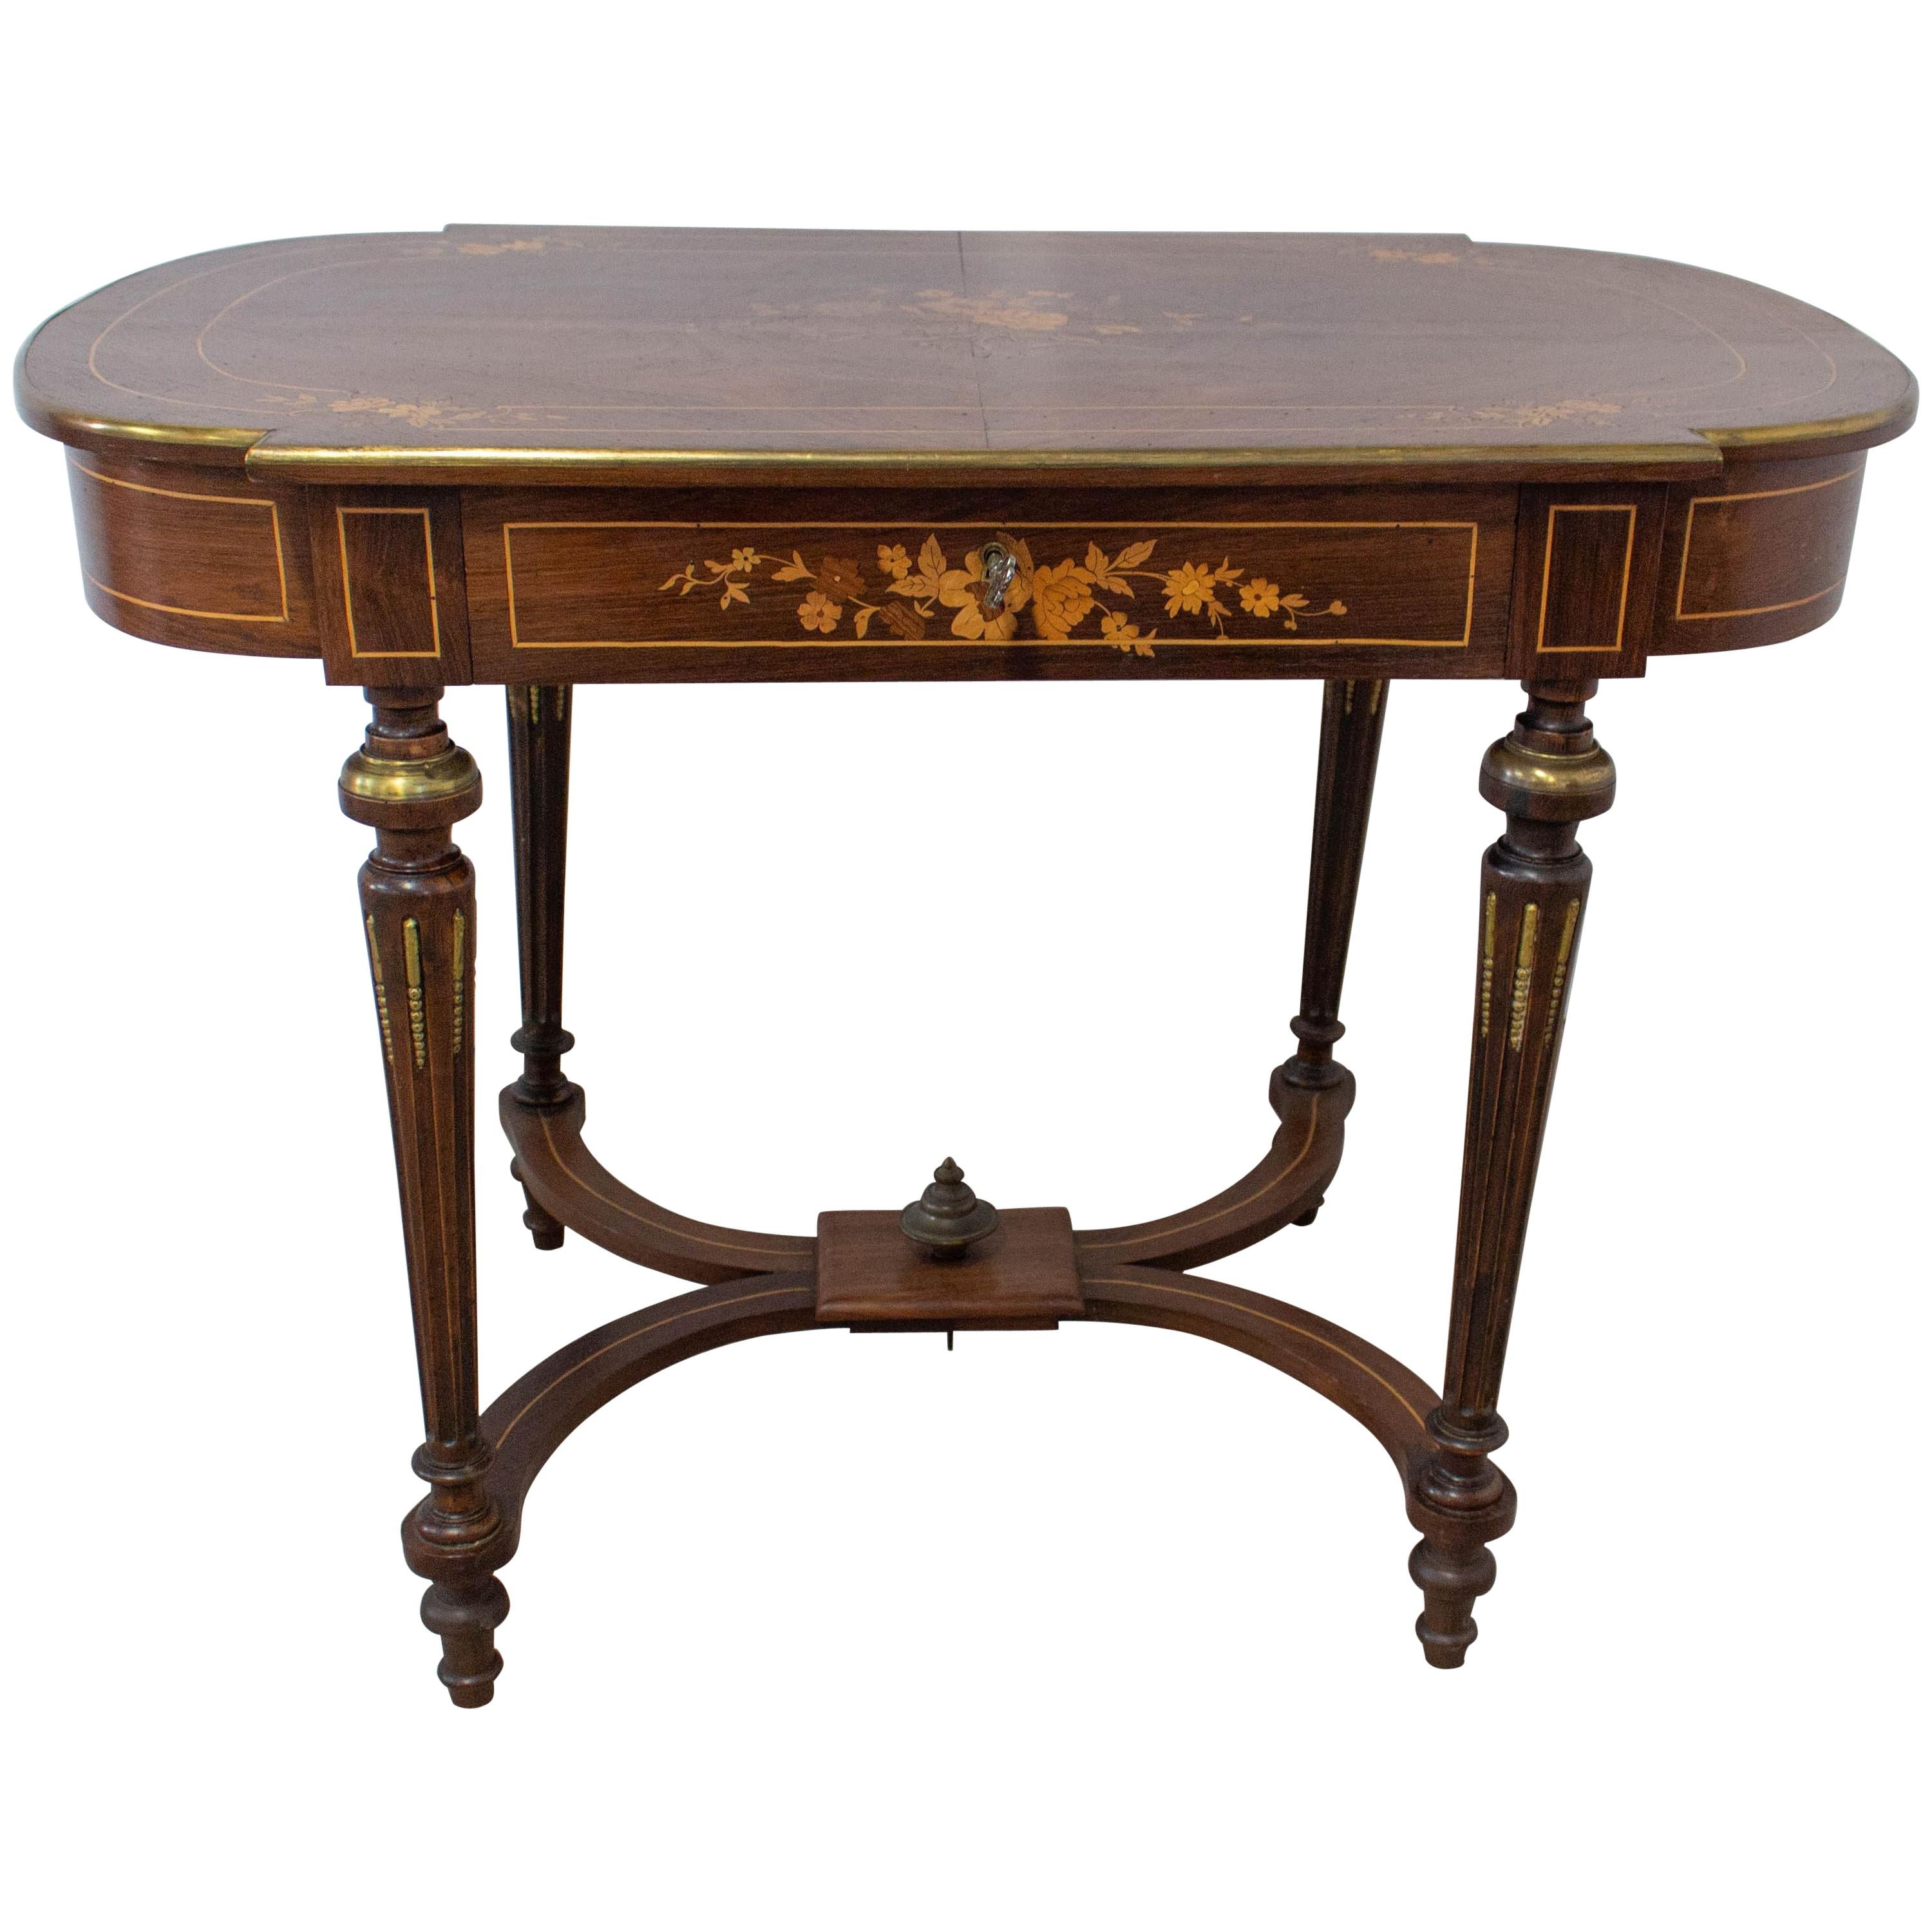 French Writing Table Louis XVI Style Floral Inlays, 19th Century